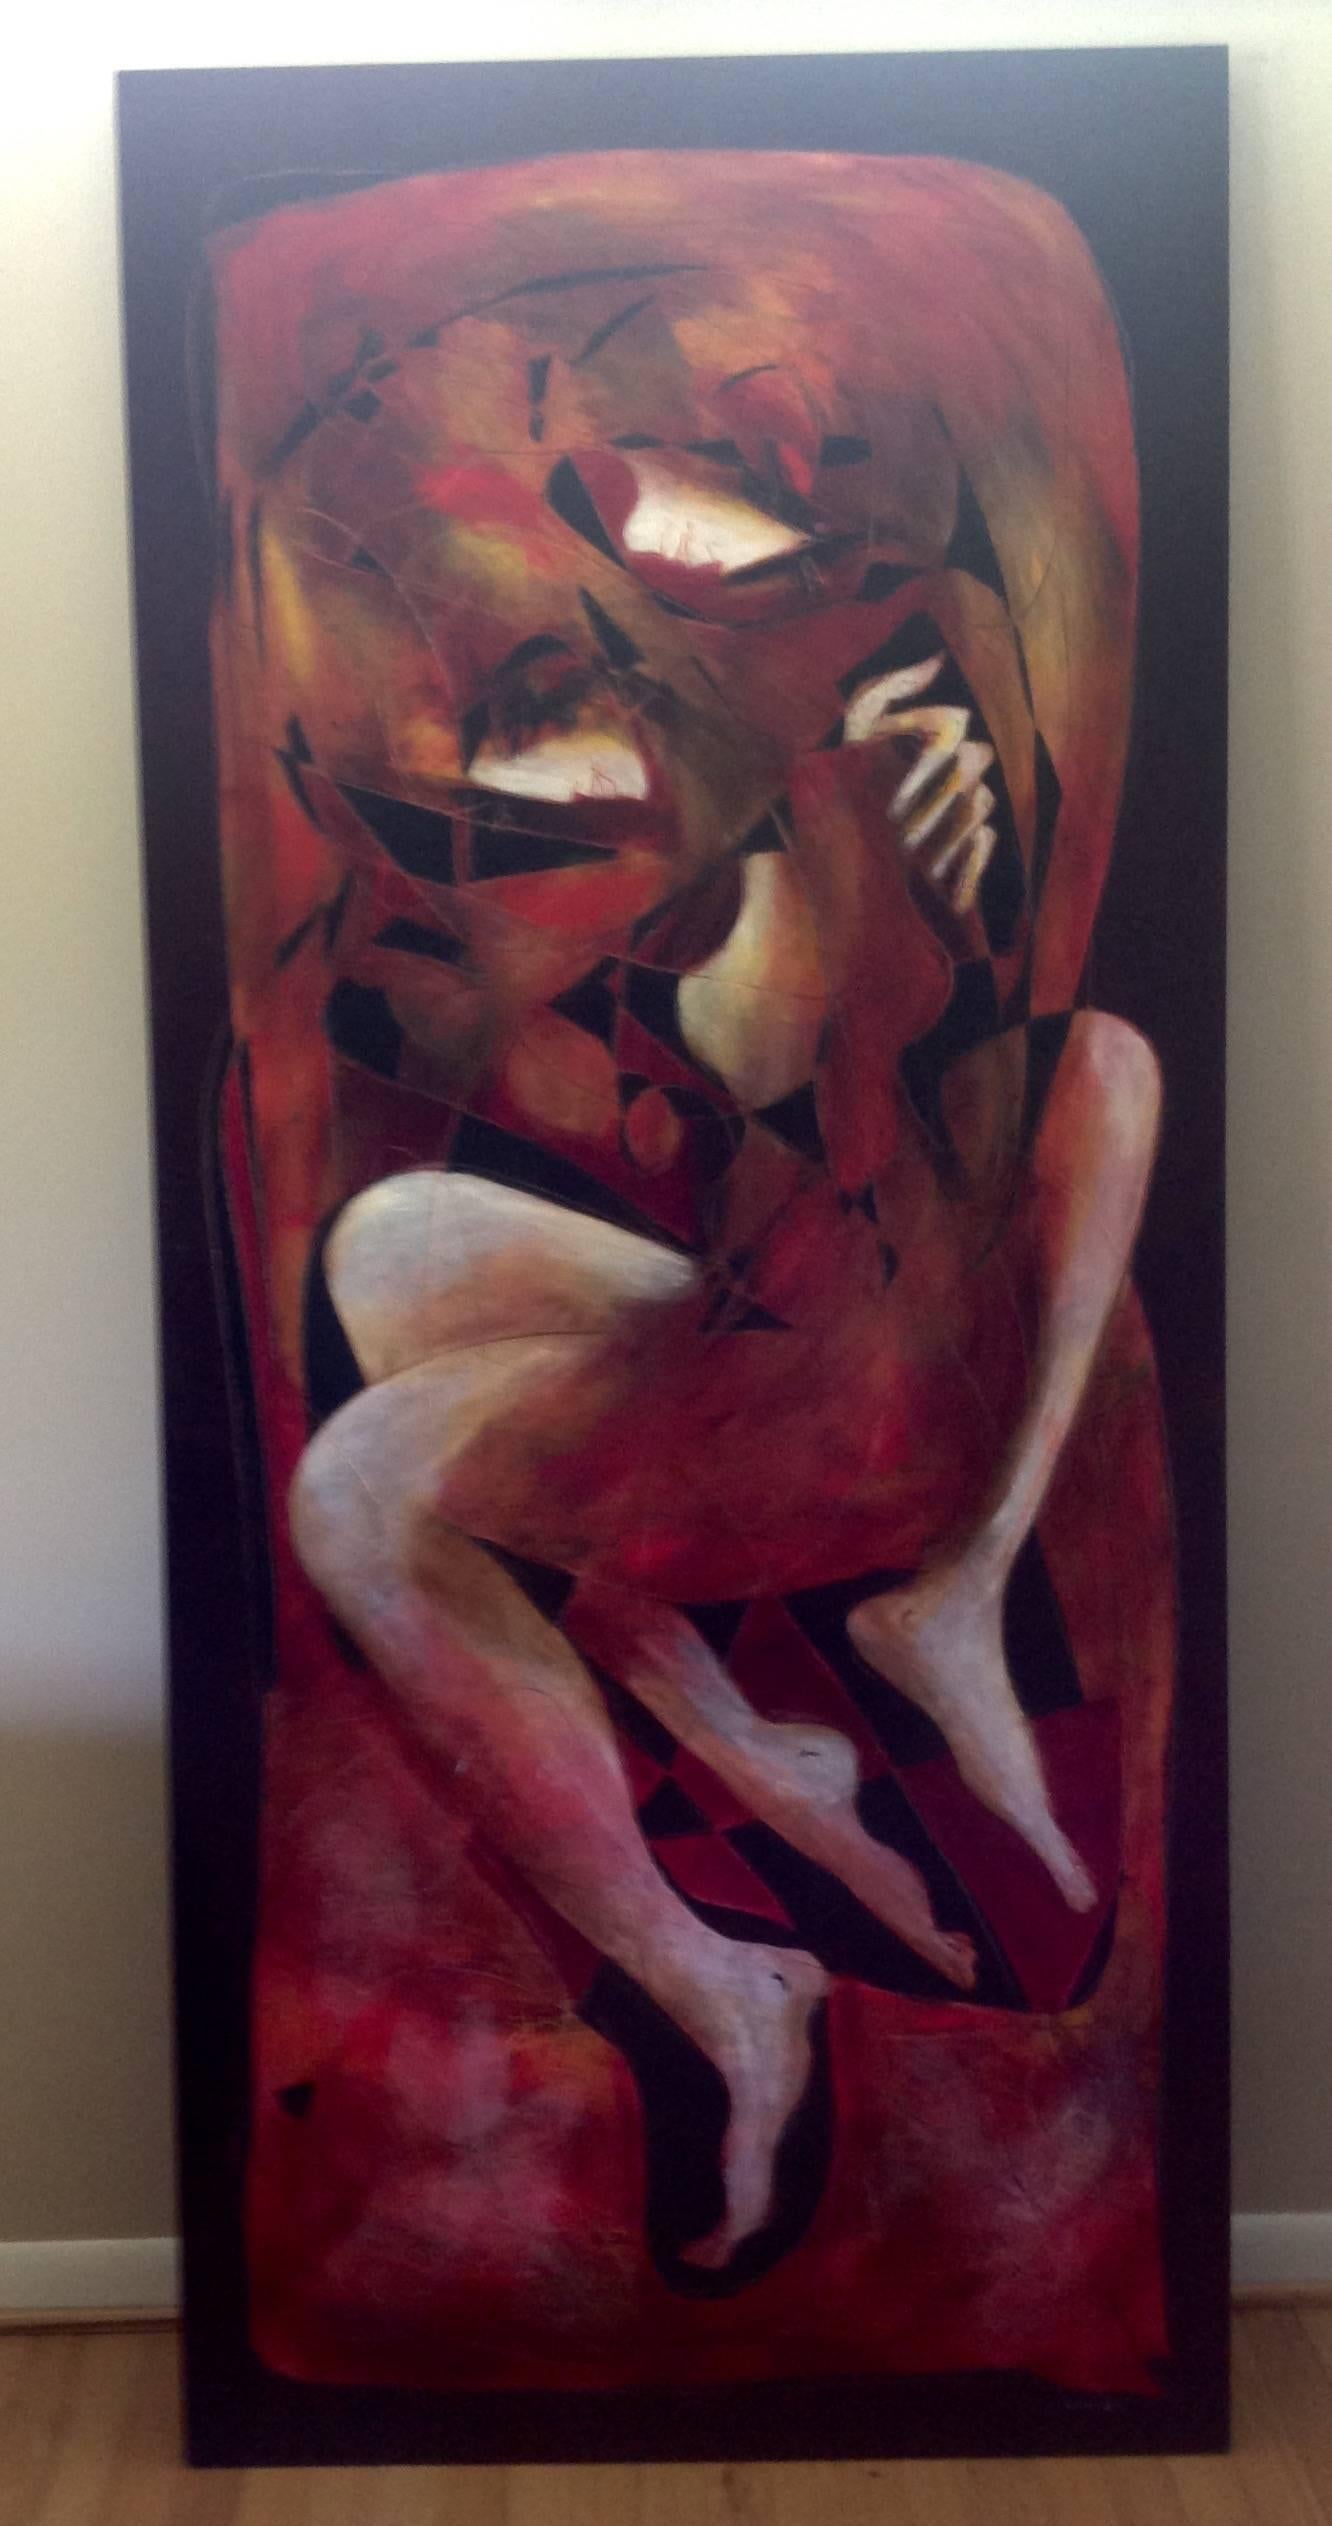 Original signed painting by Jean-Claude Gaugy titled Protection, from 2004.